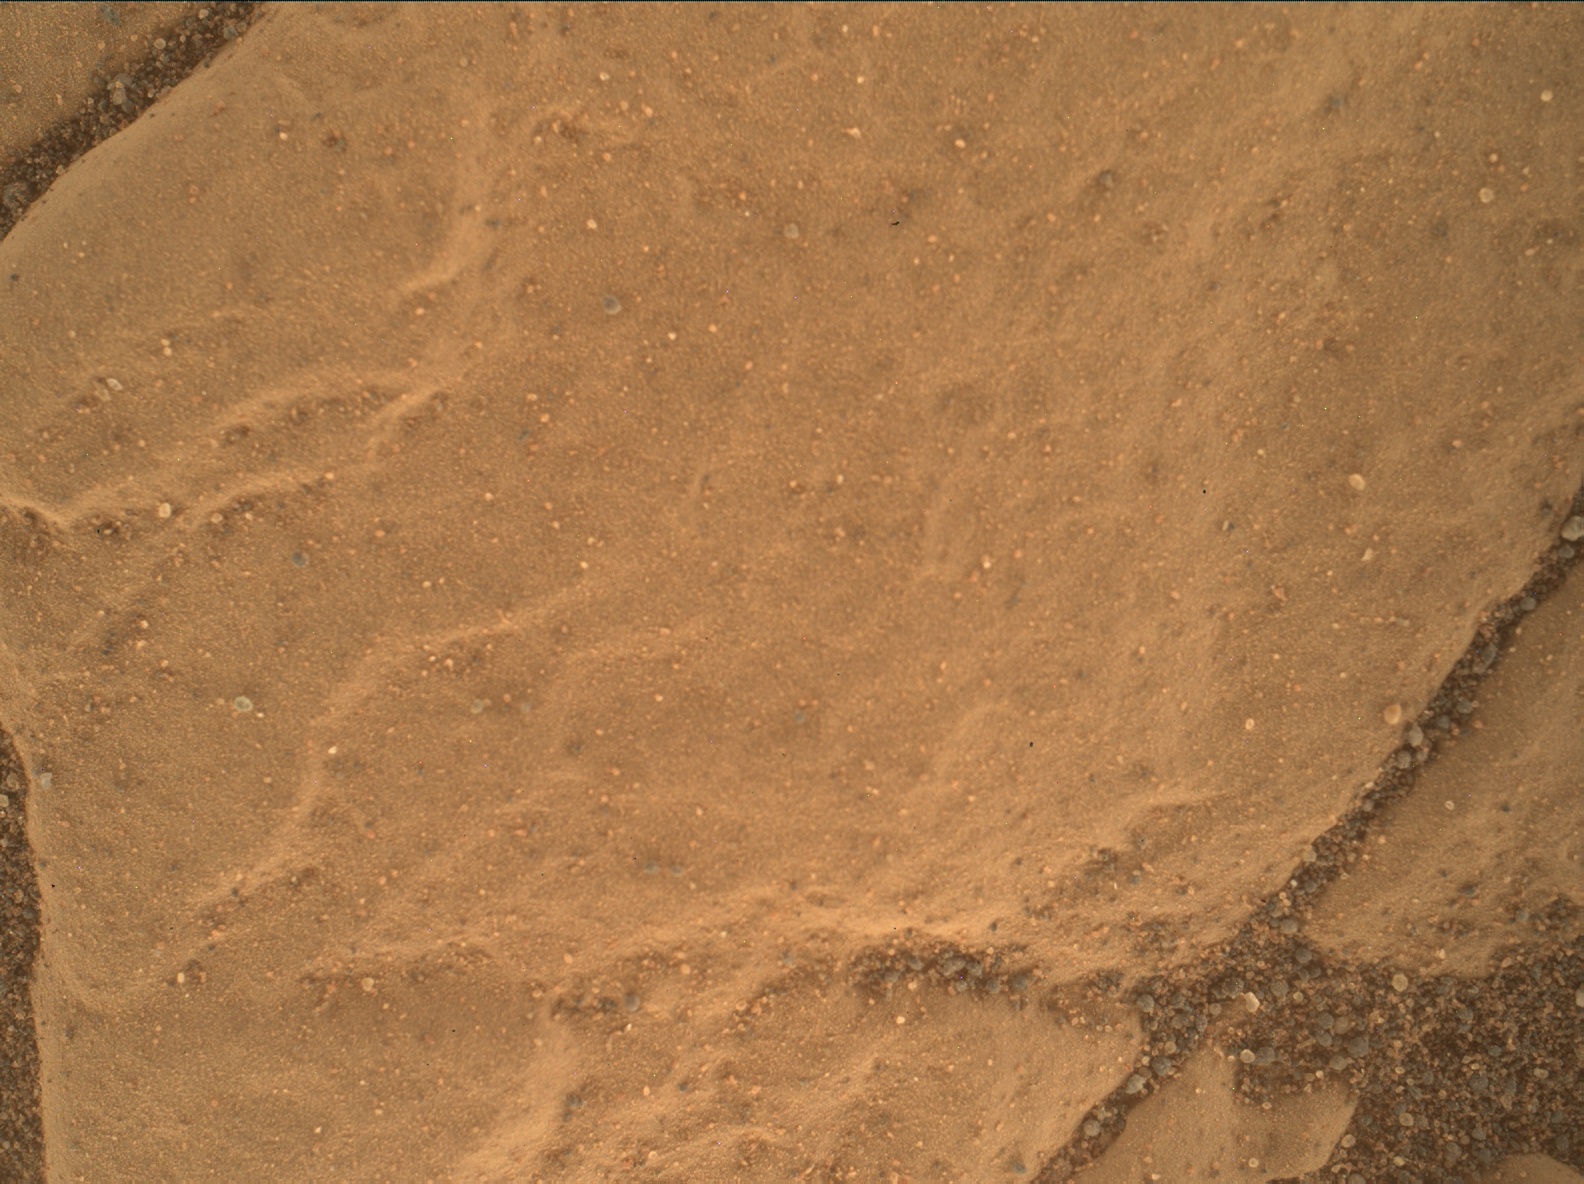 Nasa's Mars rover Curiosity acquired this image using its Mars Hand Lens Imager (MAHLI) on Sol 2413